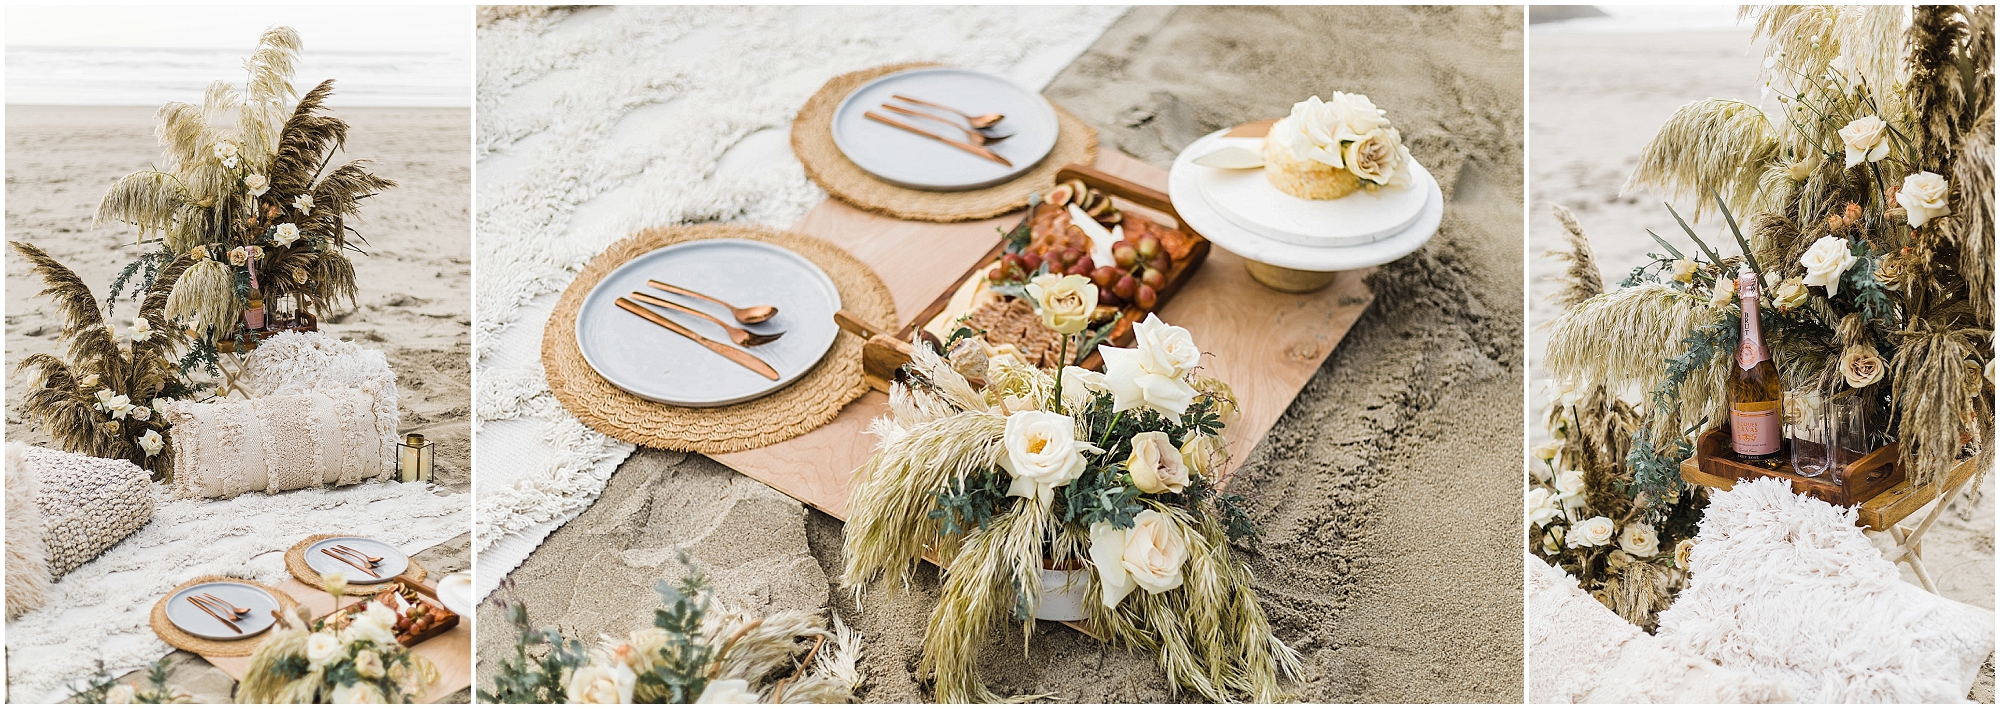 A romantic picnic on the beach featuring a charcuterie board, cake and champagne. A lovely sitting area with cream pillows, a white rug and beautiful florals decorate the sand for an intimate Oregon Coast elopement at Proposal Rock. | Erica Swantek Photography